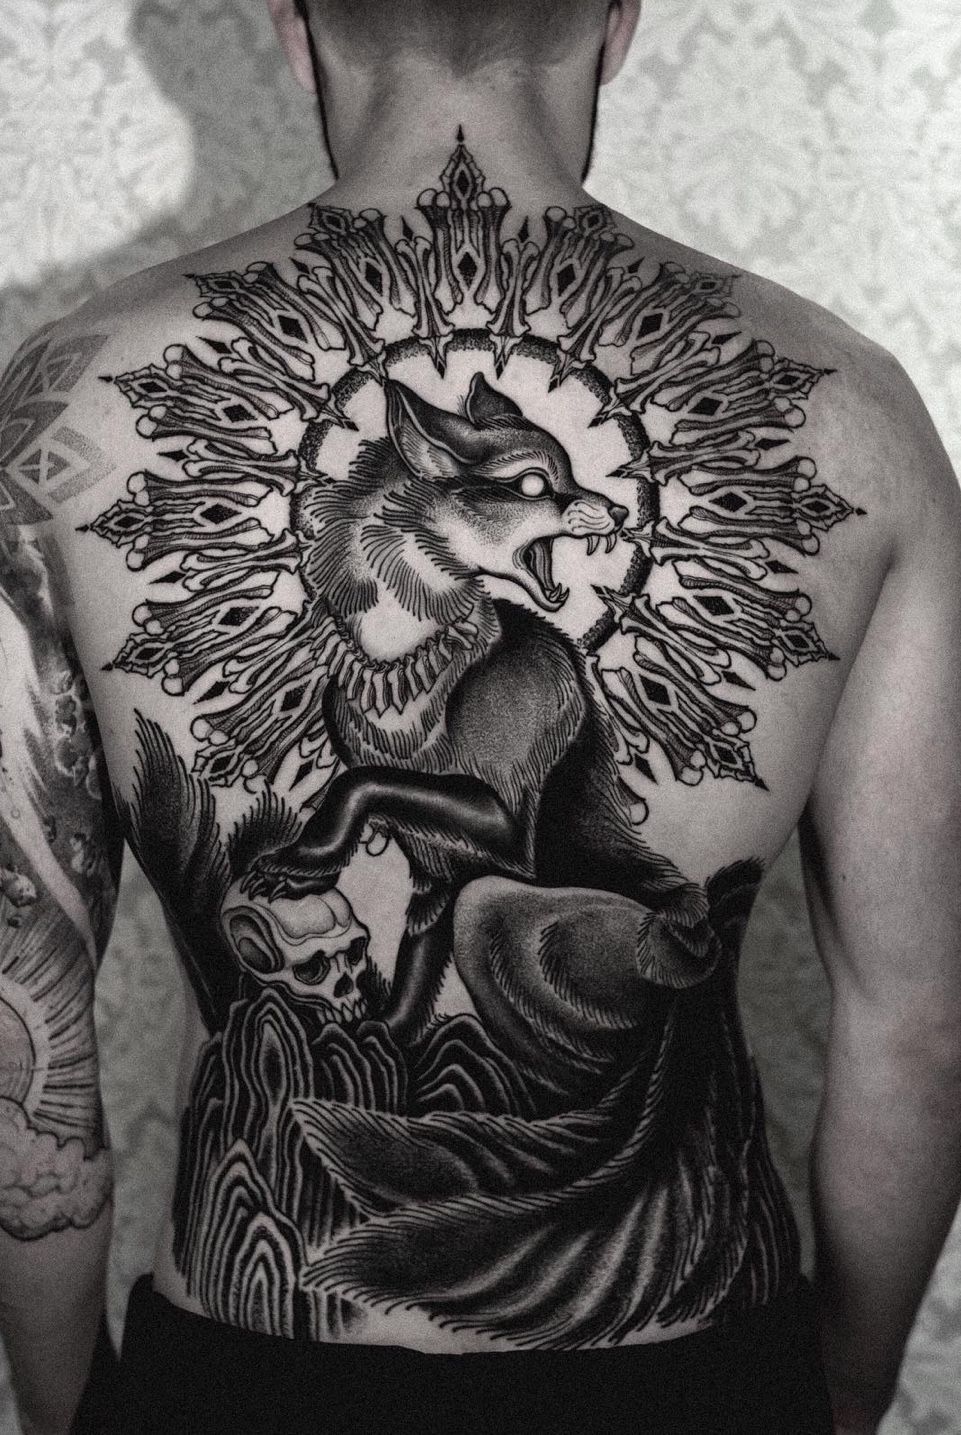 Passion of itsmatthewjohn Cat of nine tails for this tortured soul   would love to make more tattoos like this   Instagram